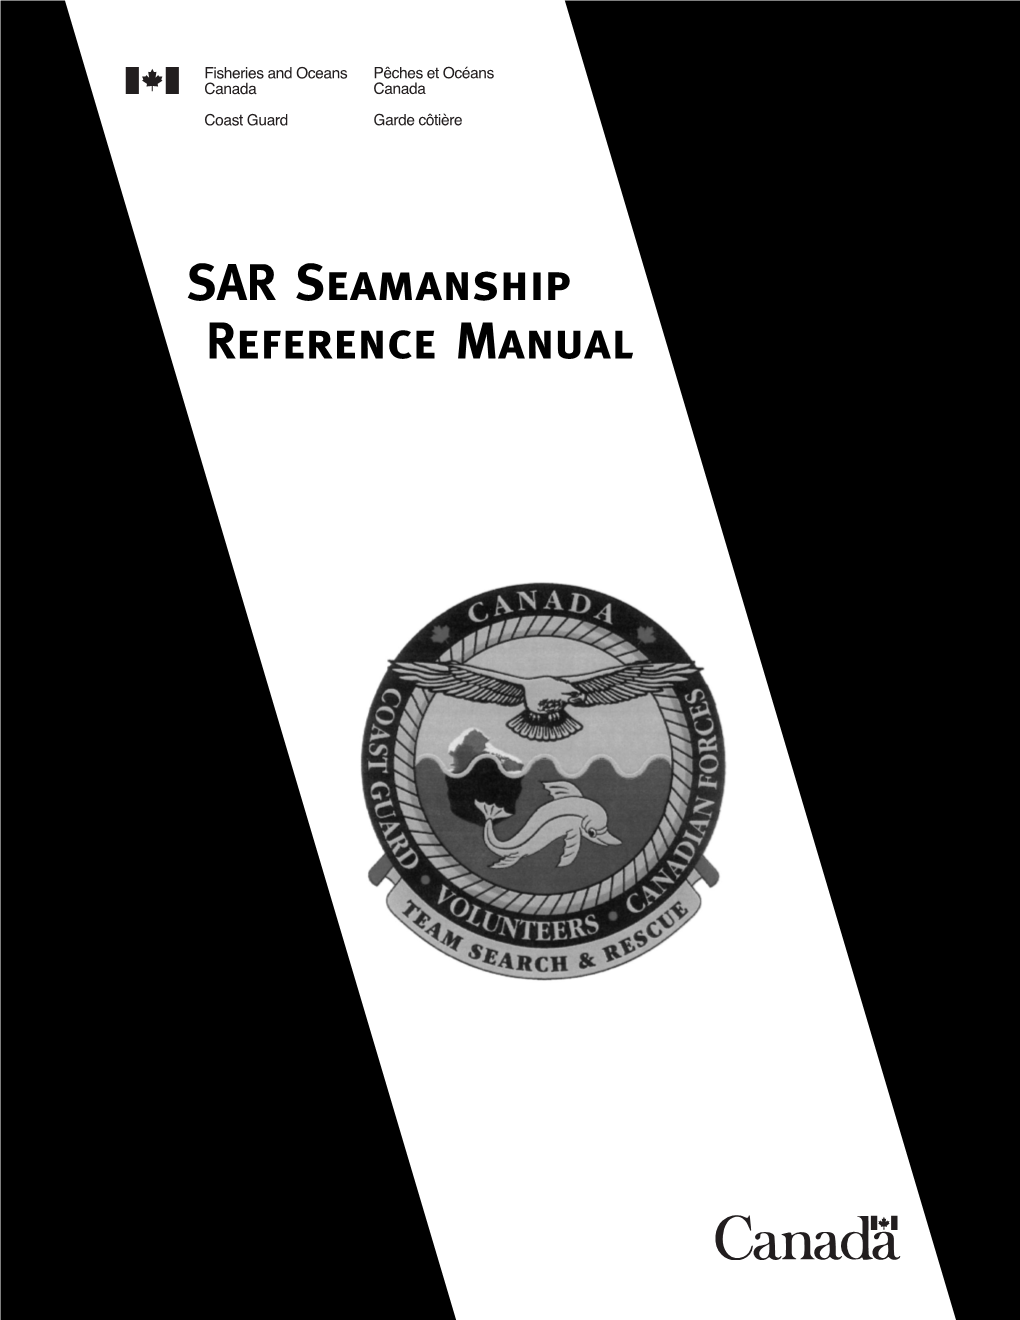 SAR Seamanship Reference Manual ©Her Majesty the Queen in Right of Canada, Represented by the Minister of Public Works and Government Services, 2000